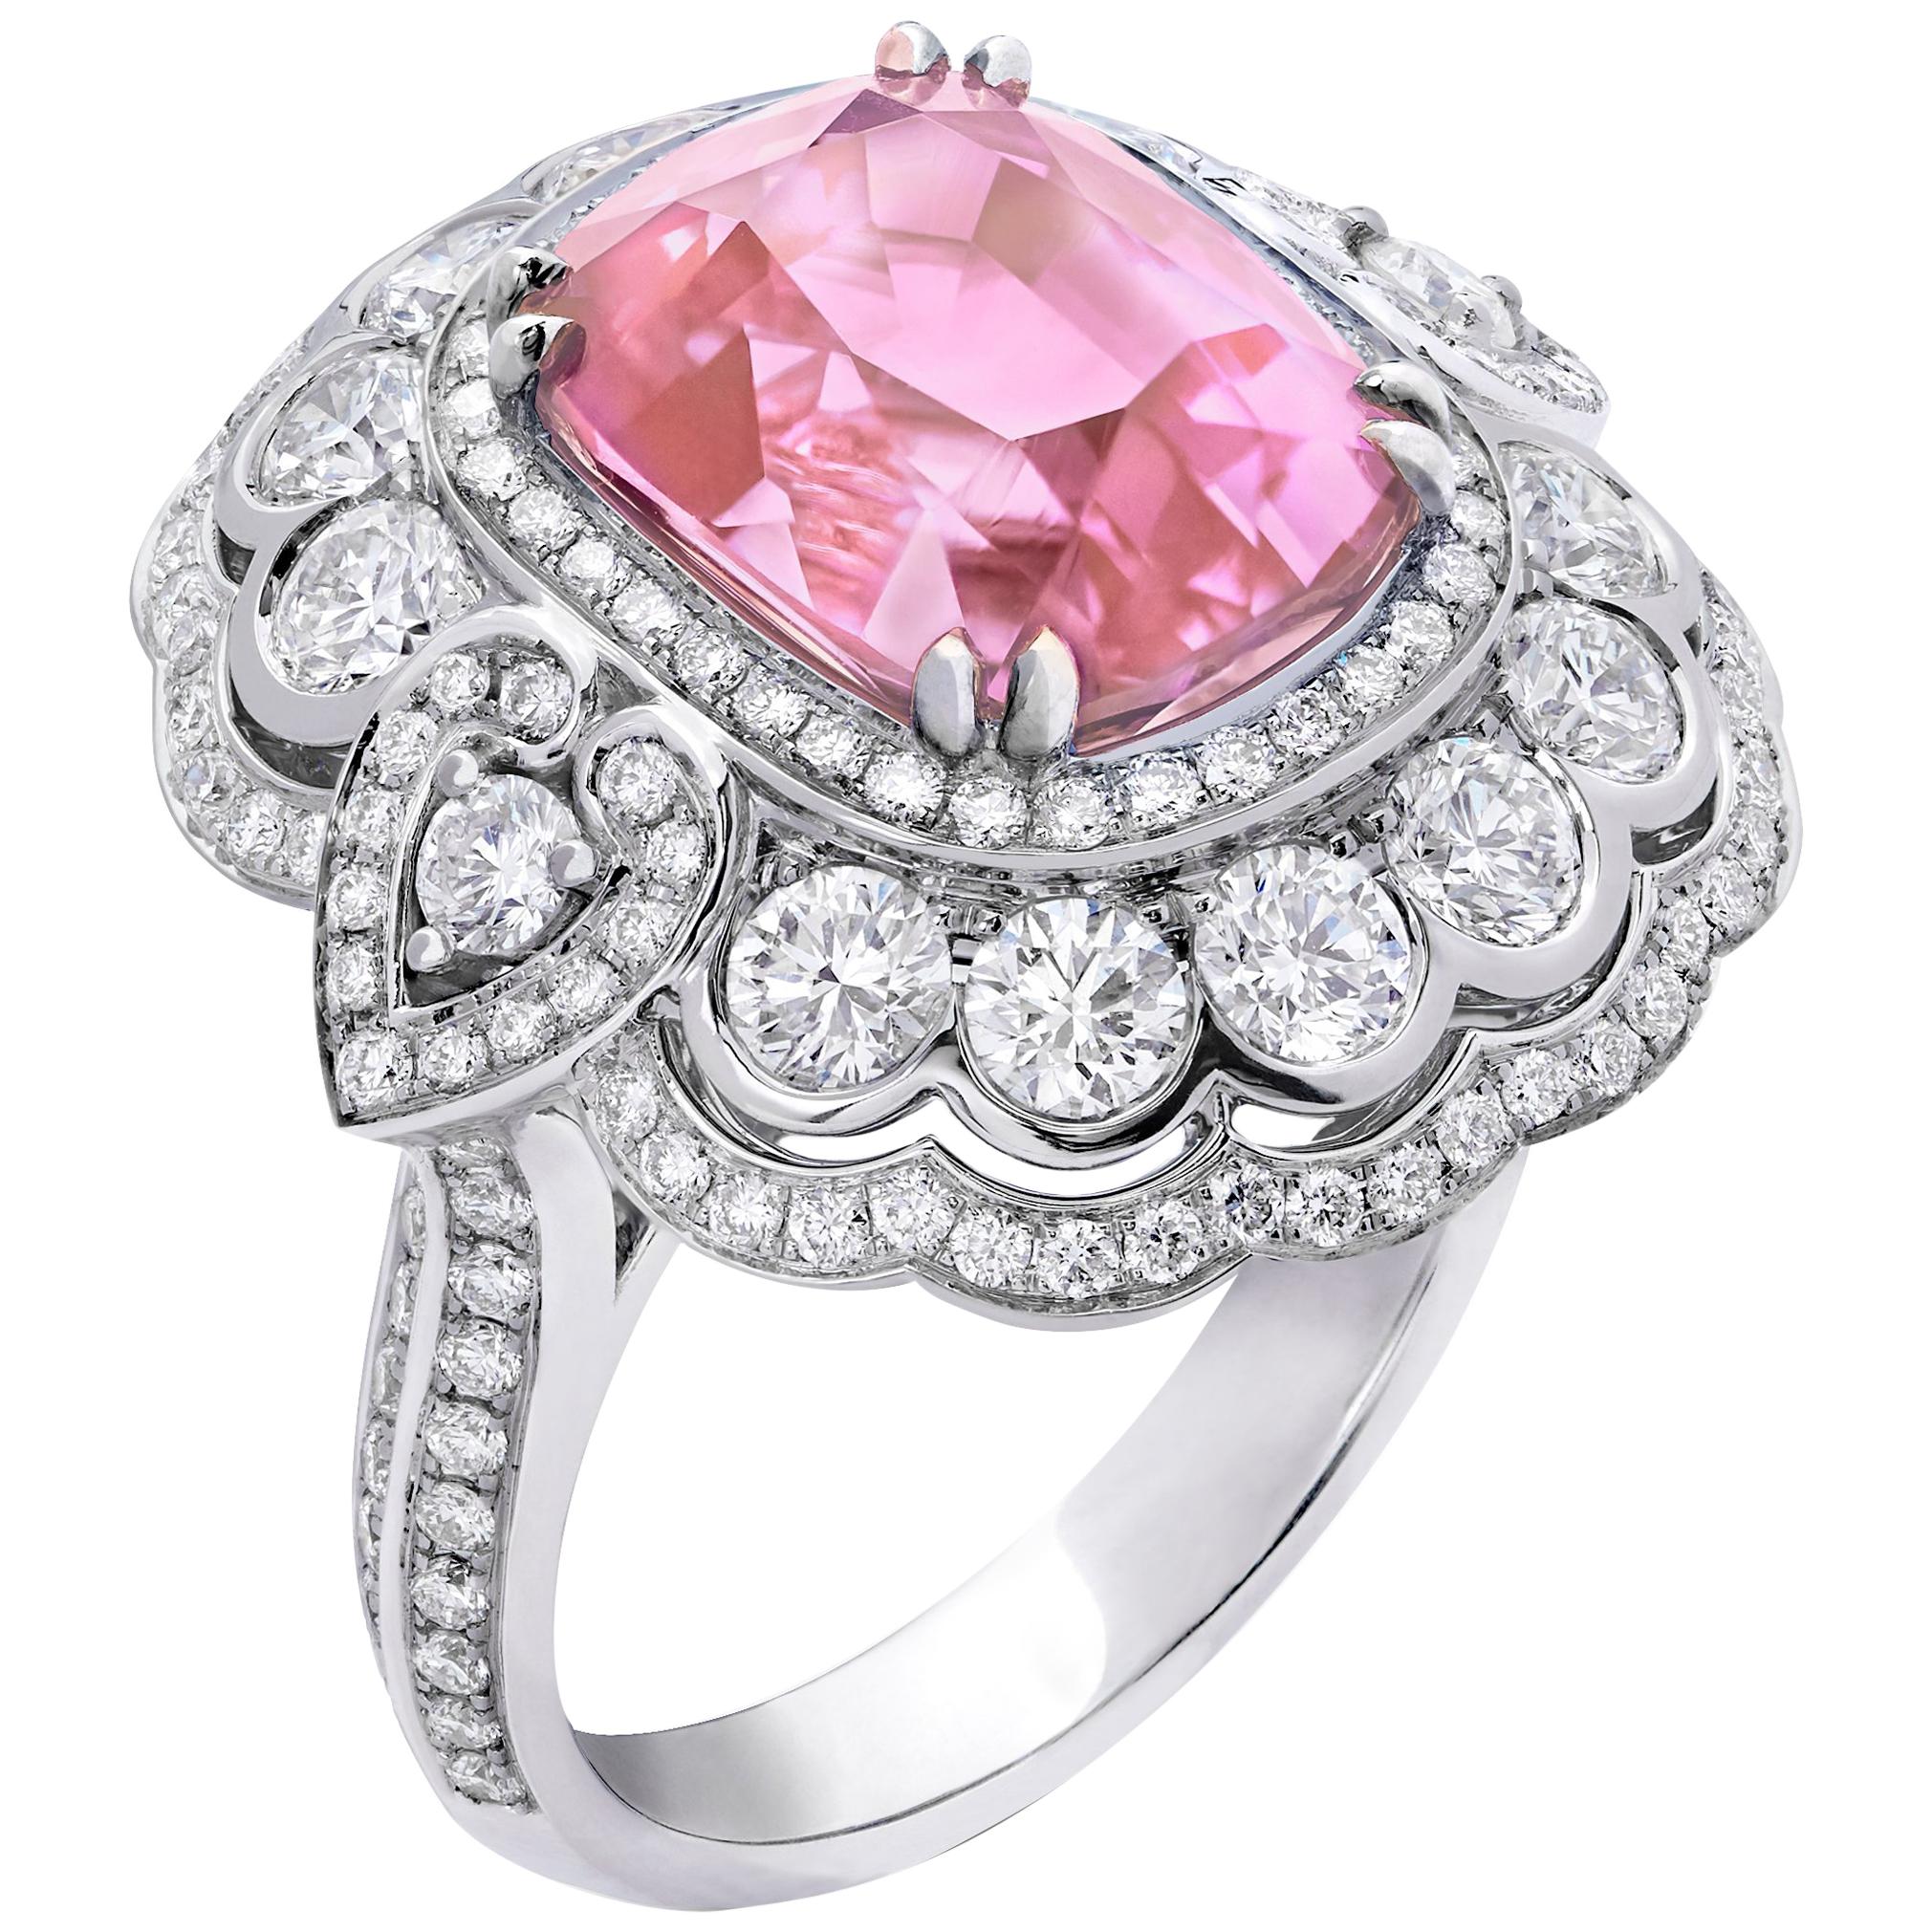 House of Garrard  GIA 5.90 Carat Padparadscha Sapphire Cocktail Ring 